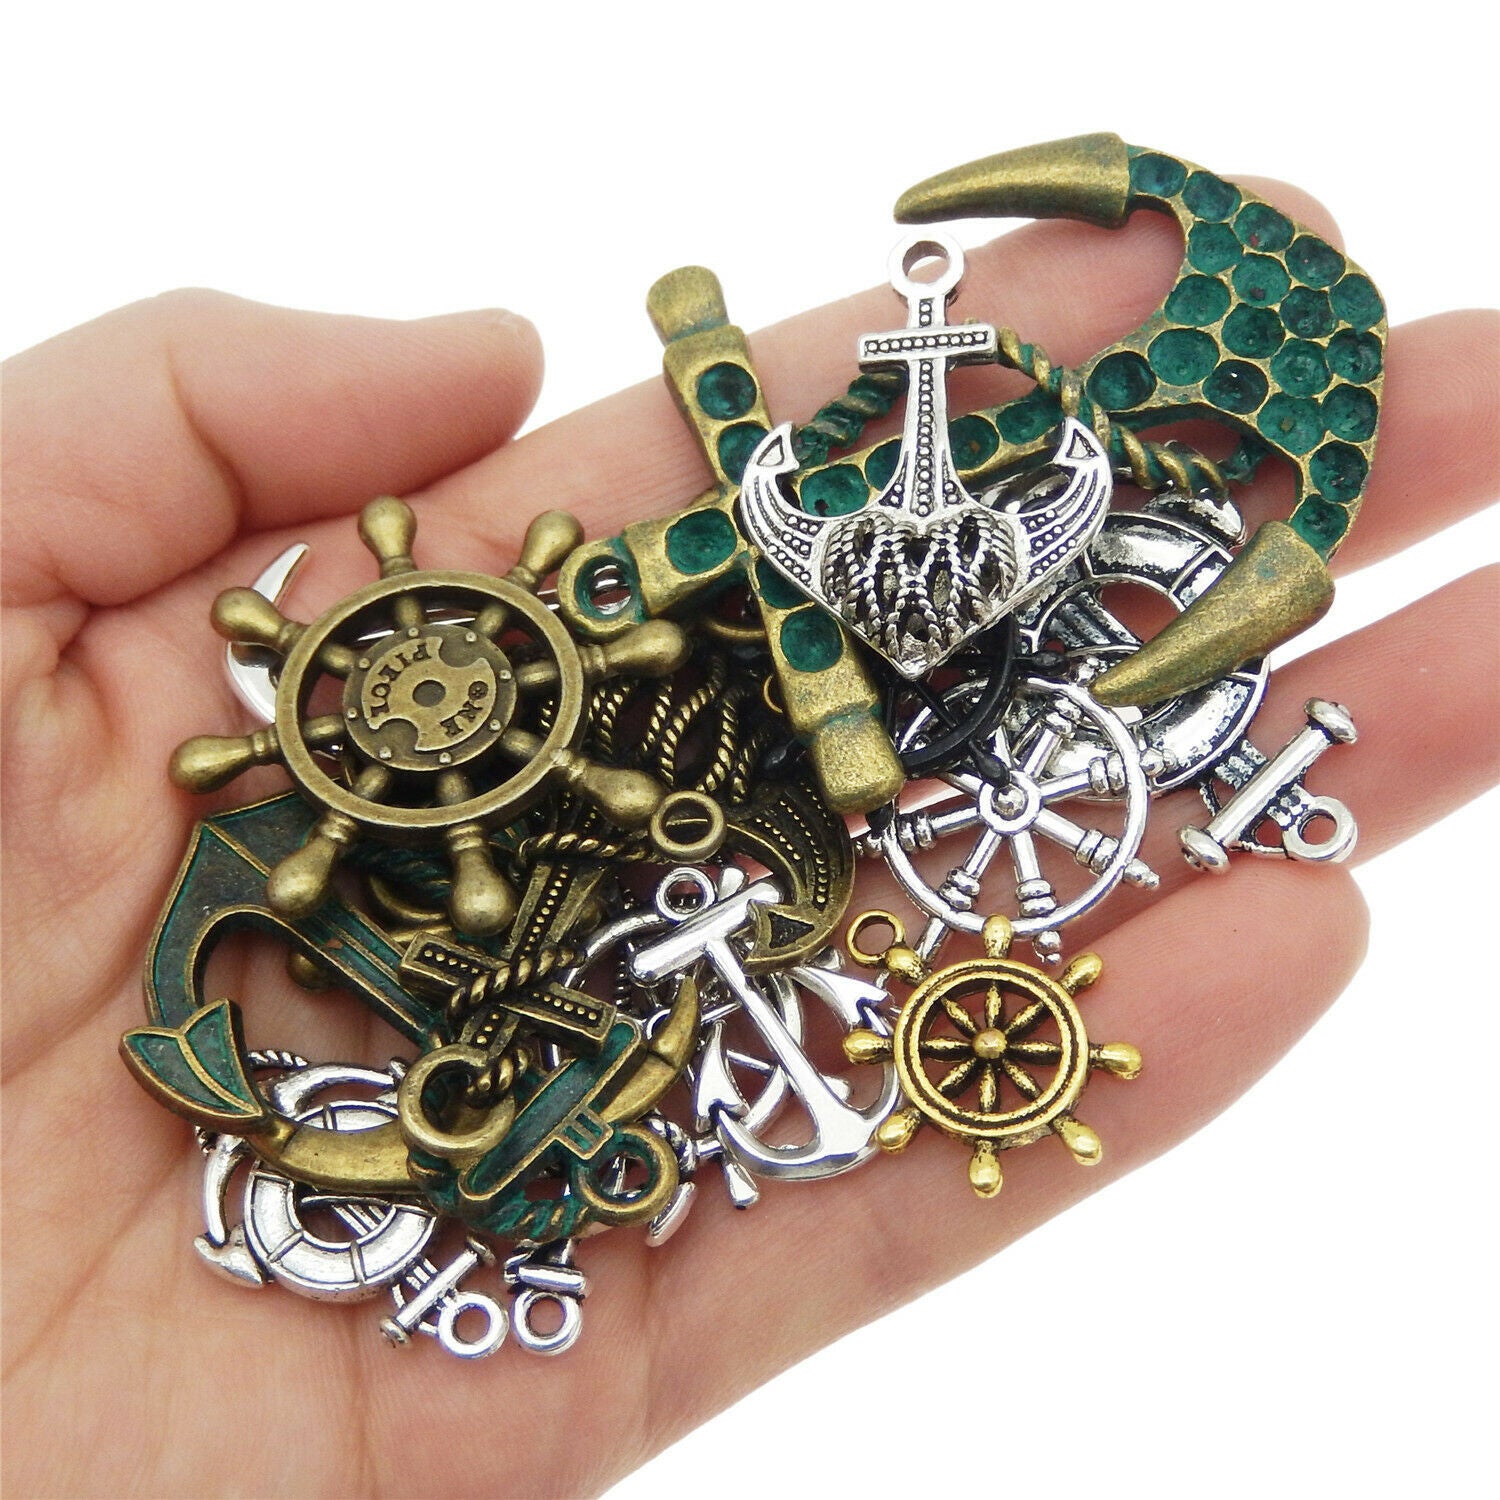 Random Alloy Anchors Mixed Kinds Pendants Charms Findings (approx.15-20 pcs)